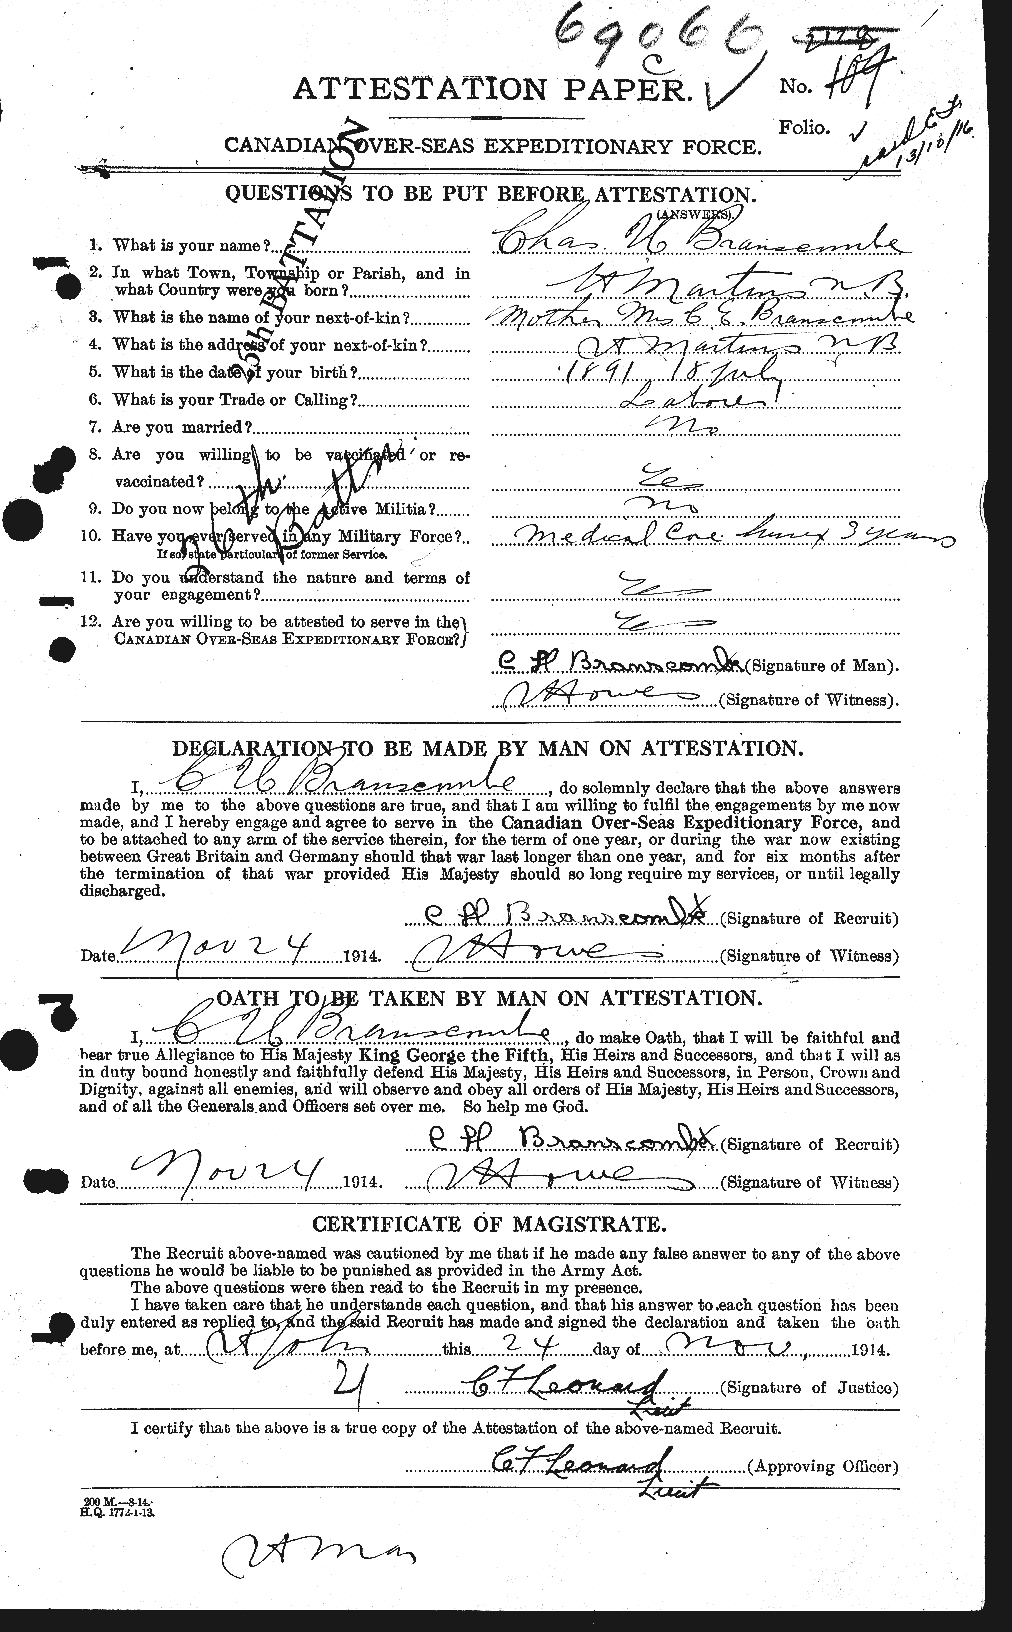 Personnel Records of the First World War - CEF 257794a